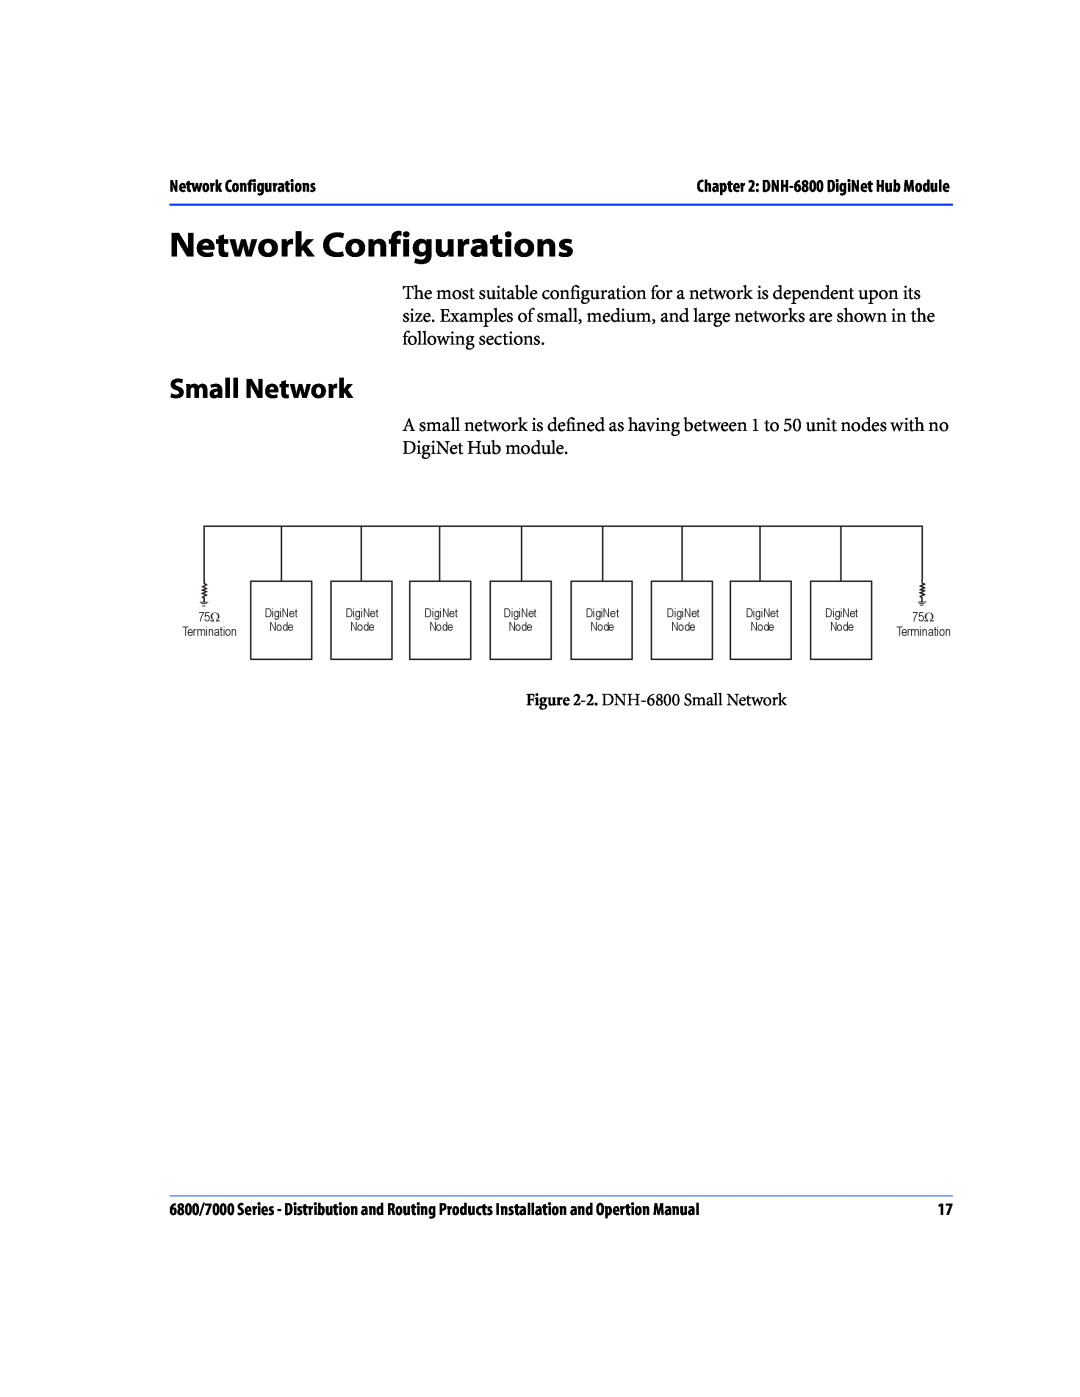 Nokia 6800 Series, 7000 Series operation manual Network Configurations, Small Network 